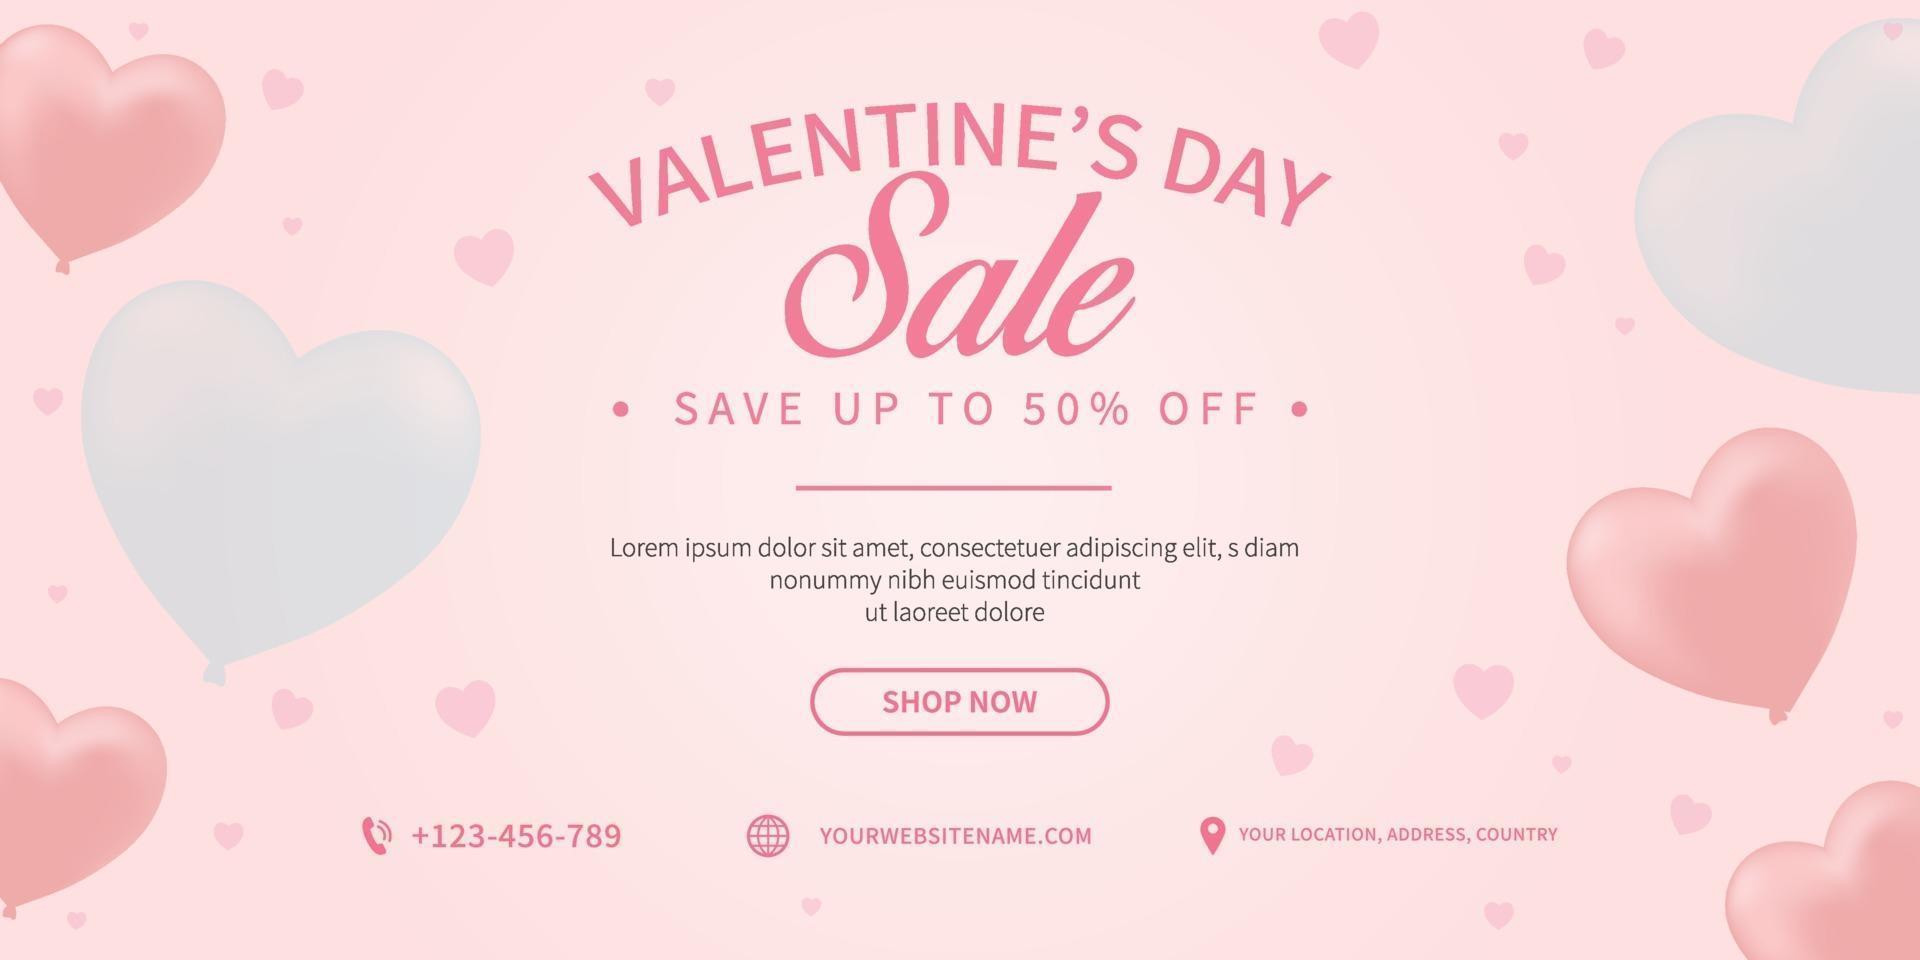 Sweet valentines day sale banner promotion in pastel color with balloon heart symbol vector design